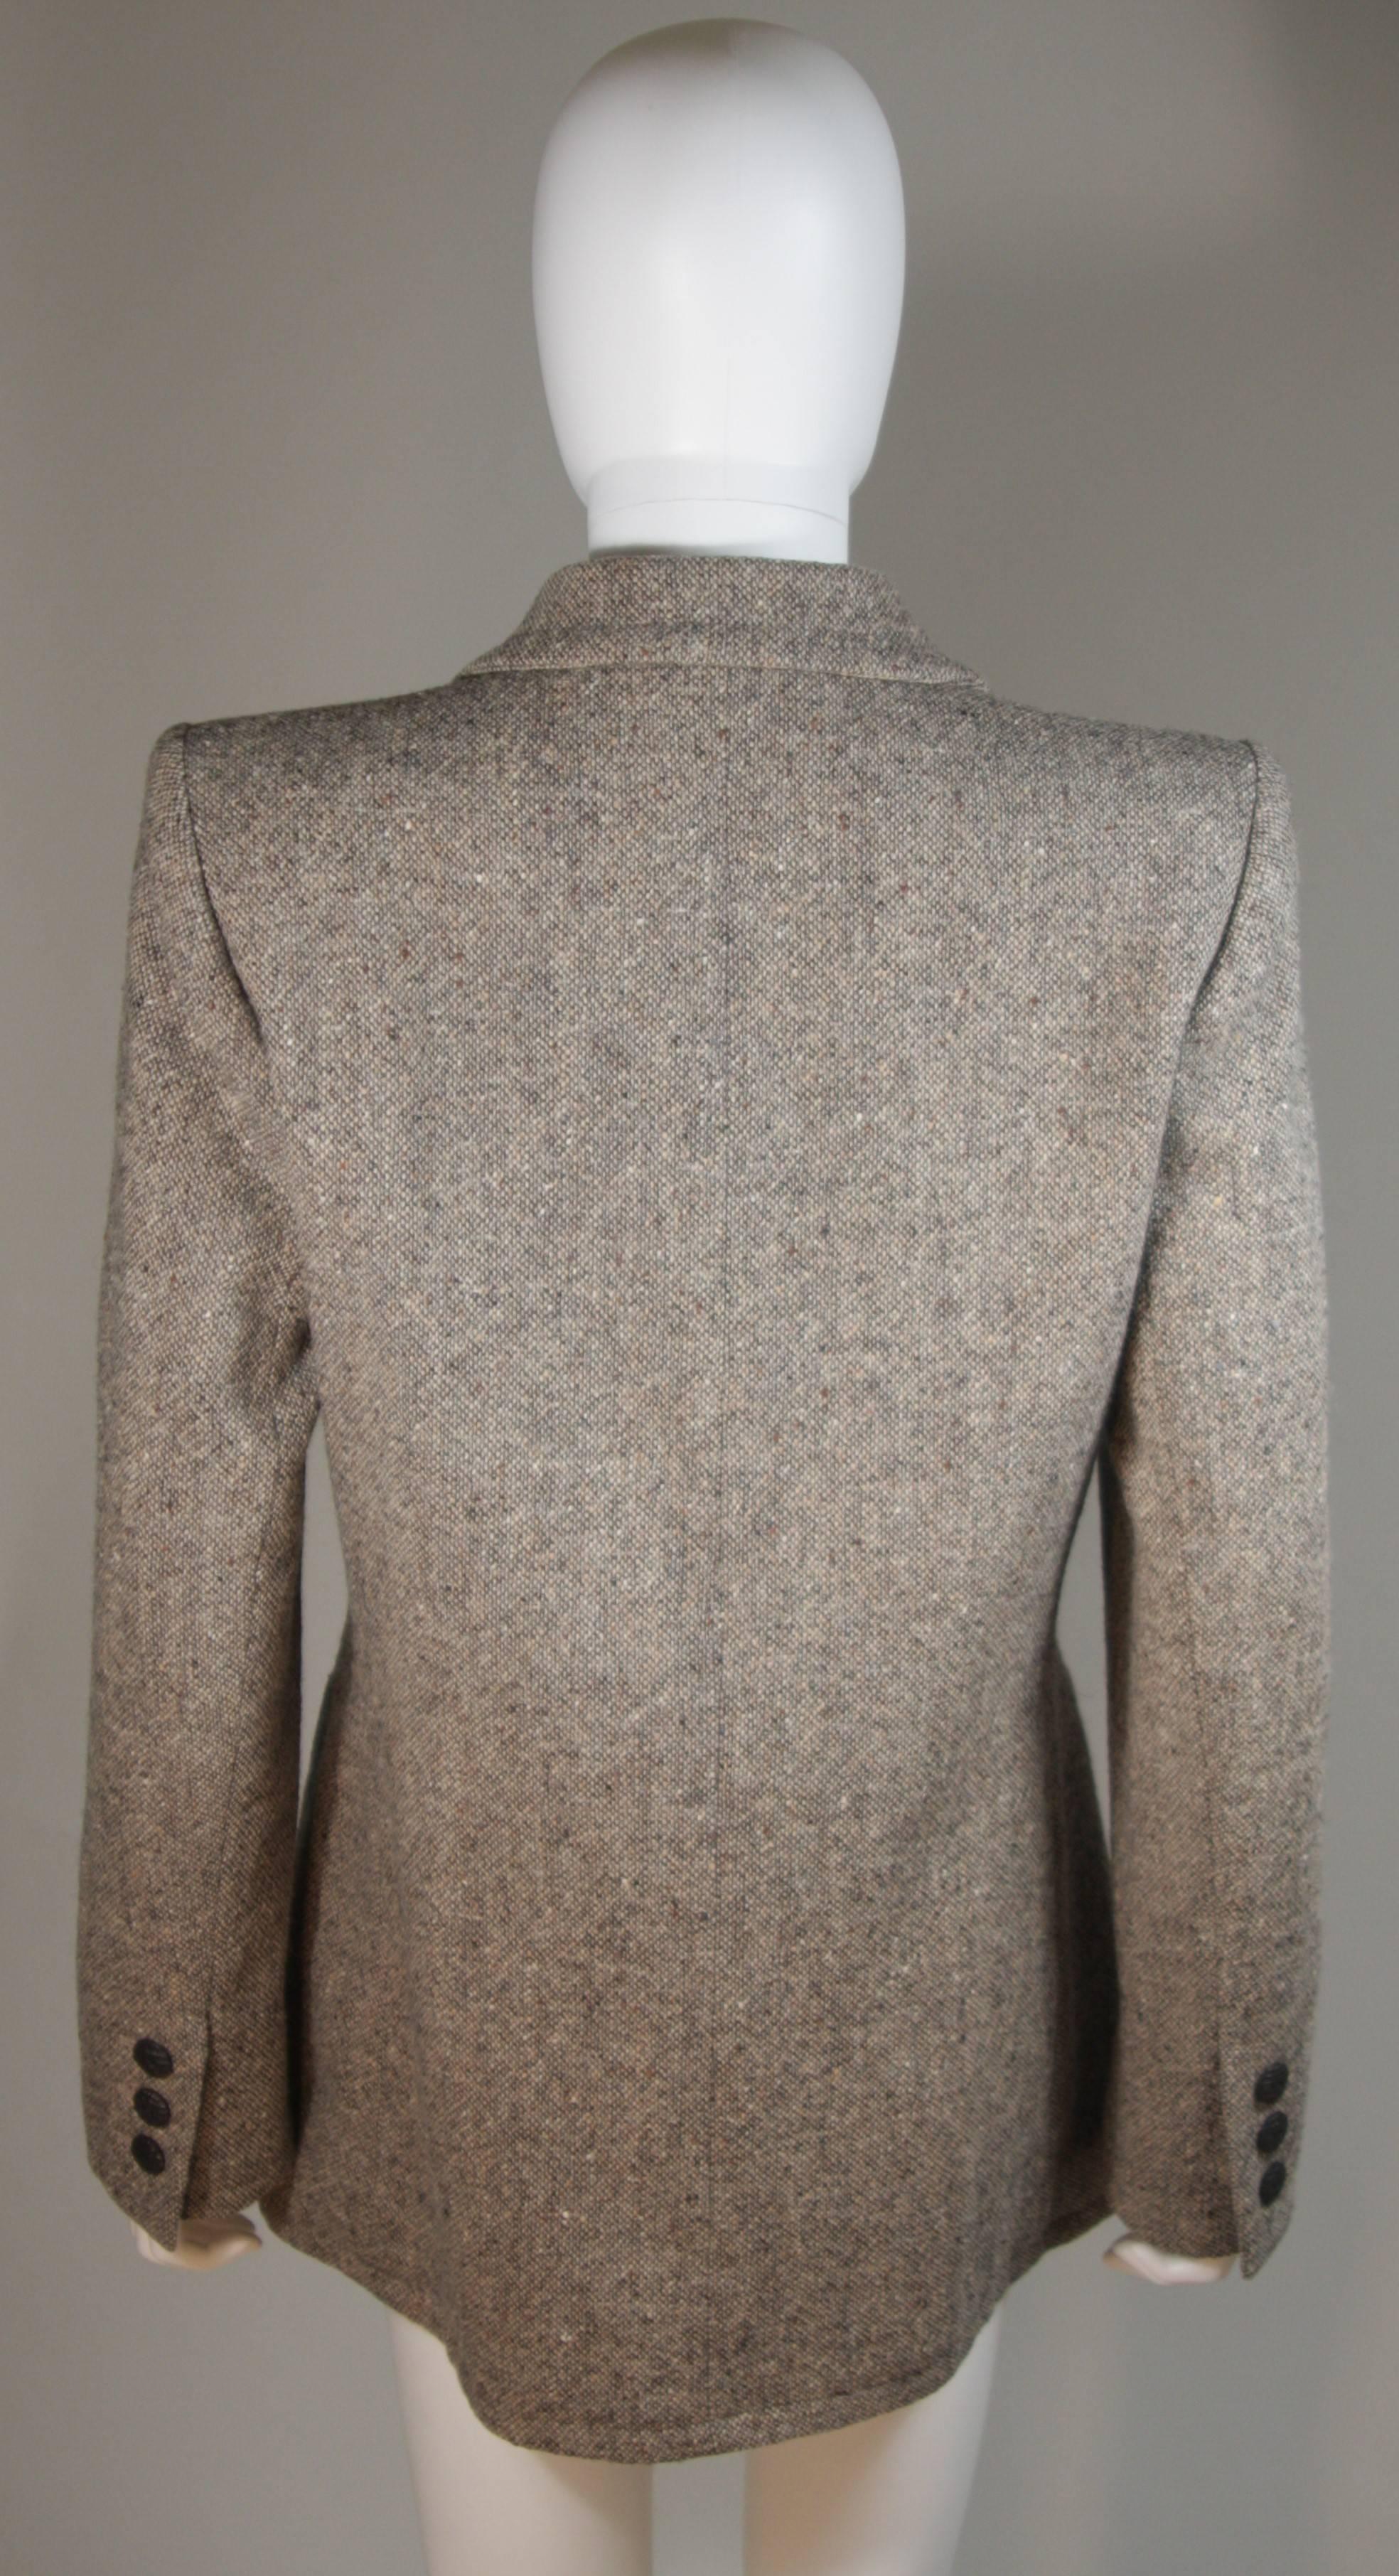 YVES SAINT LAURENT Wool Jacket with Wood Buttons Size 40 4